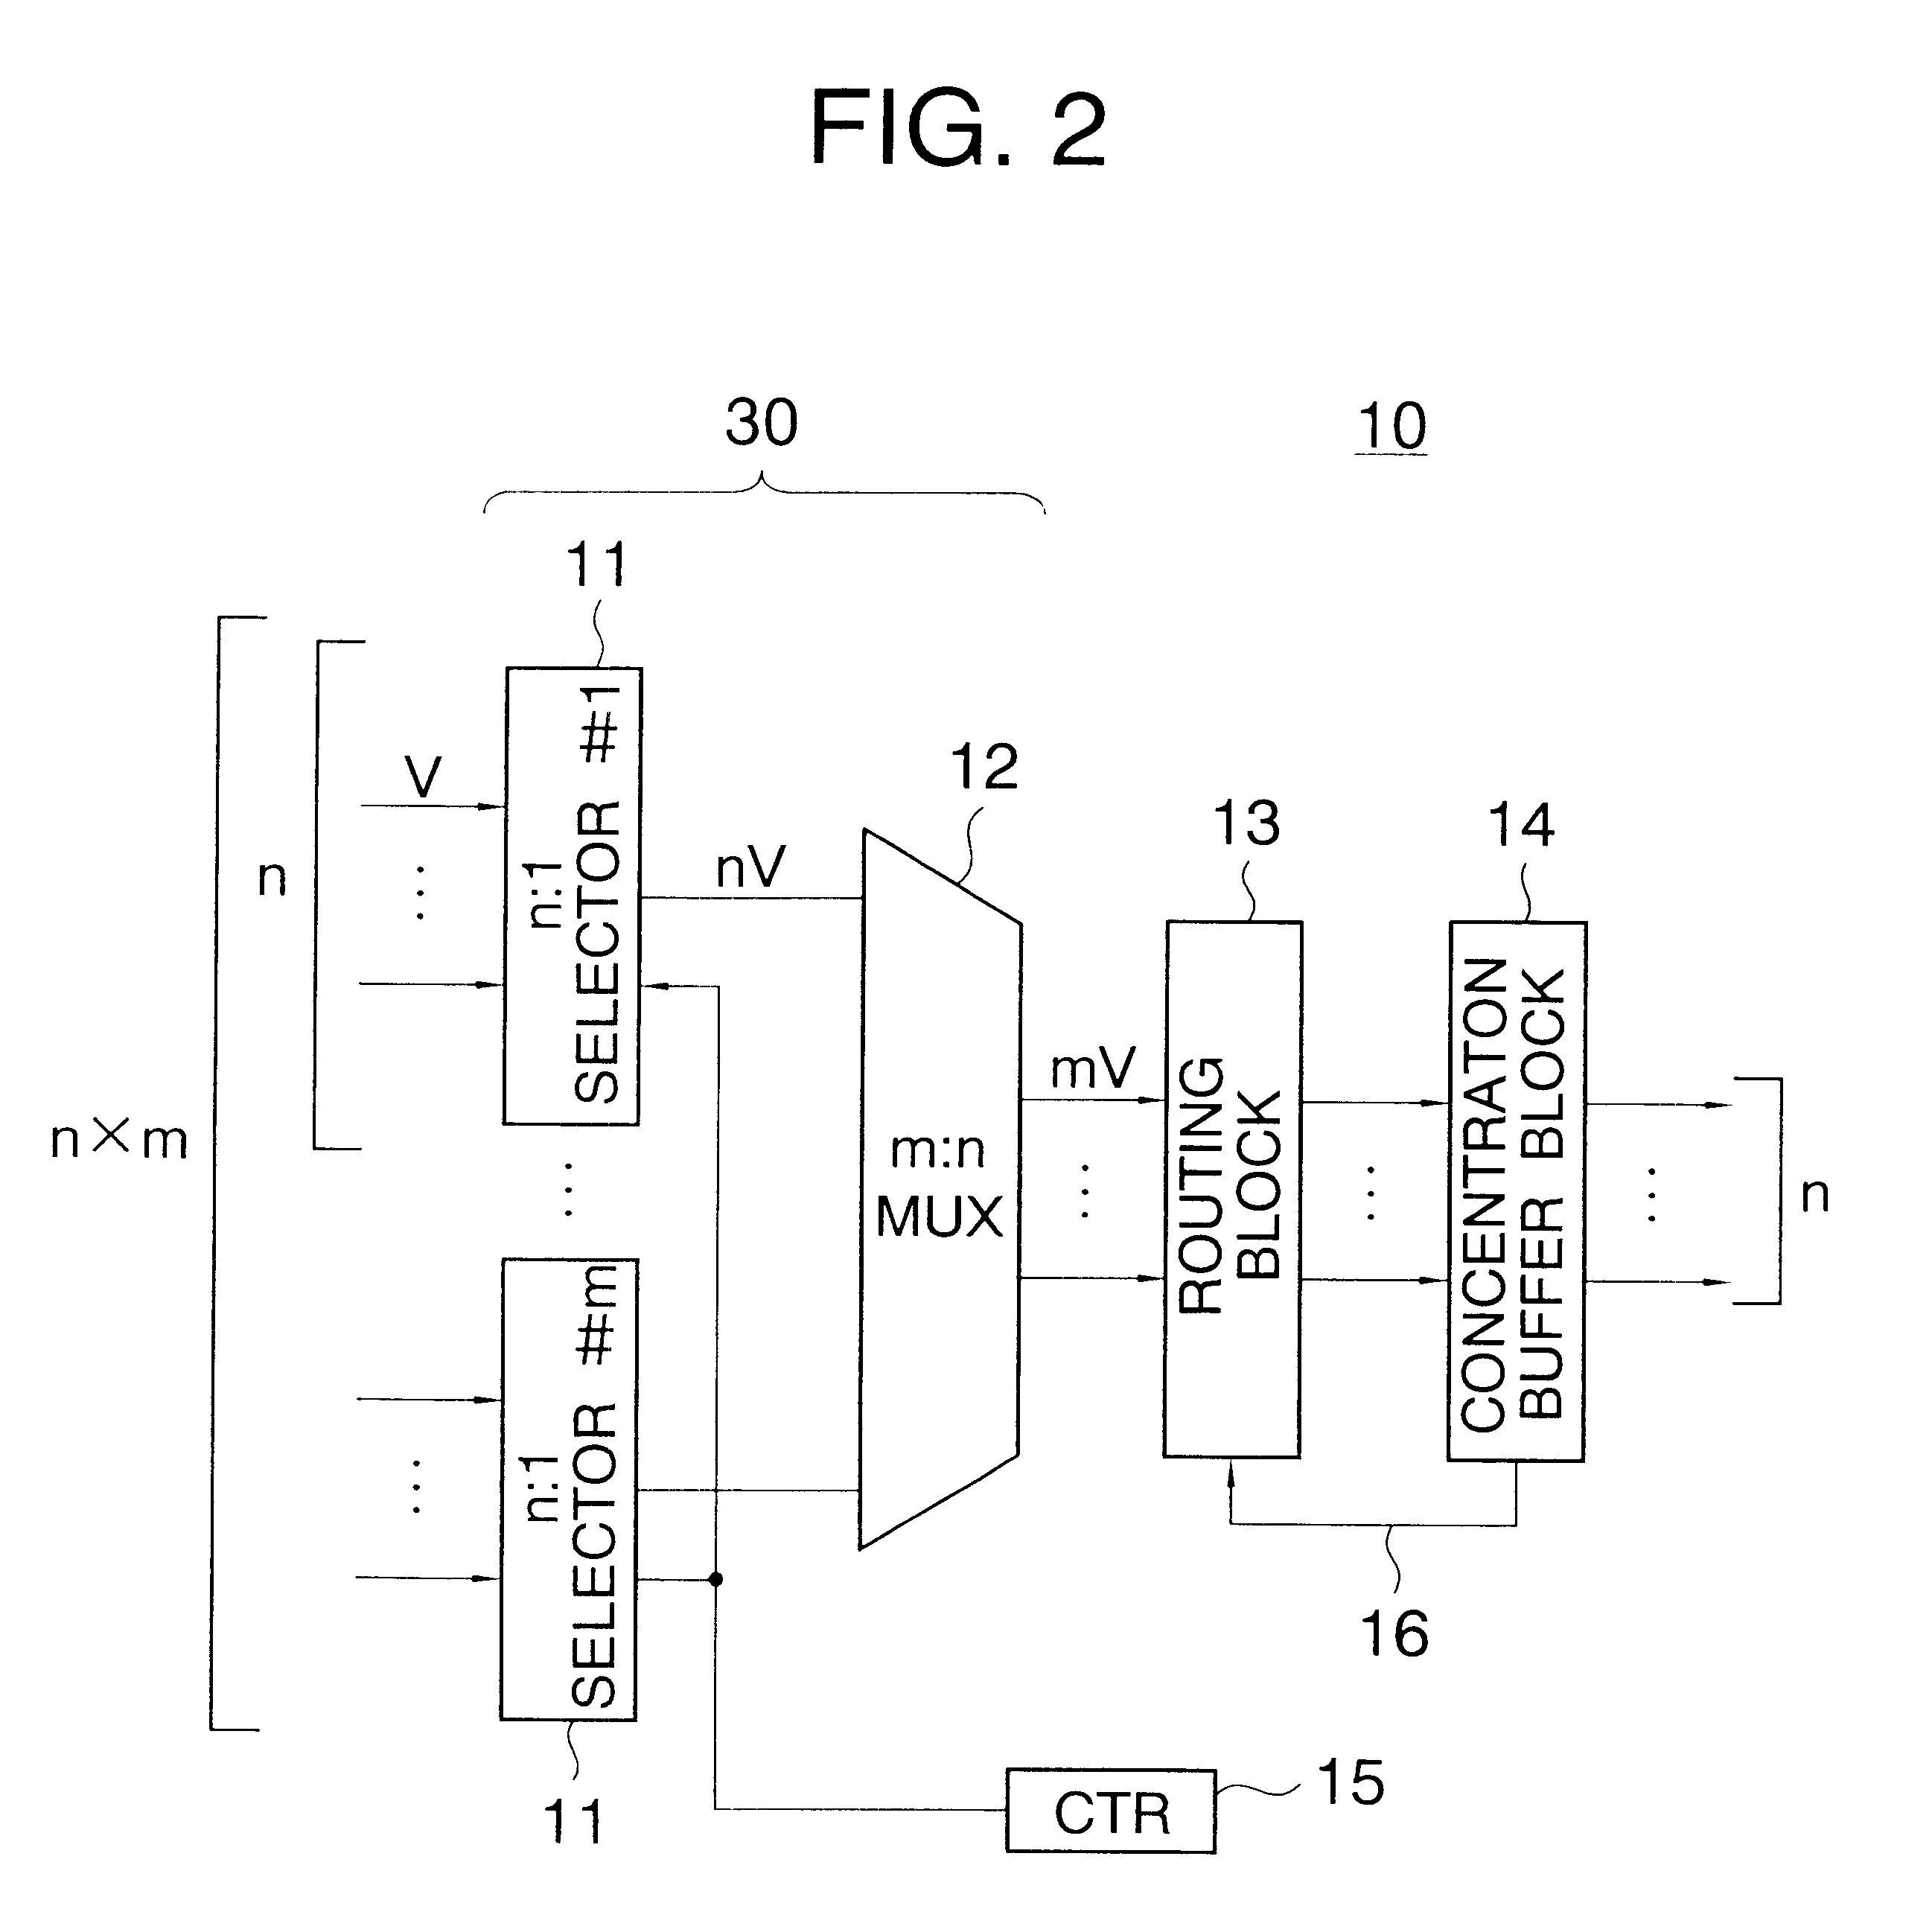 Concentrator type ATM switch for an ATM switching system